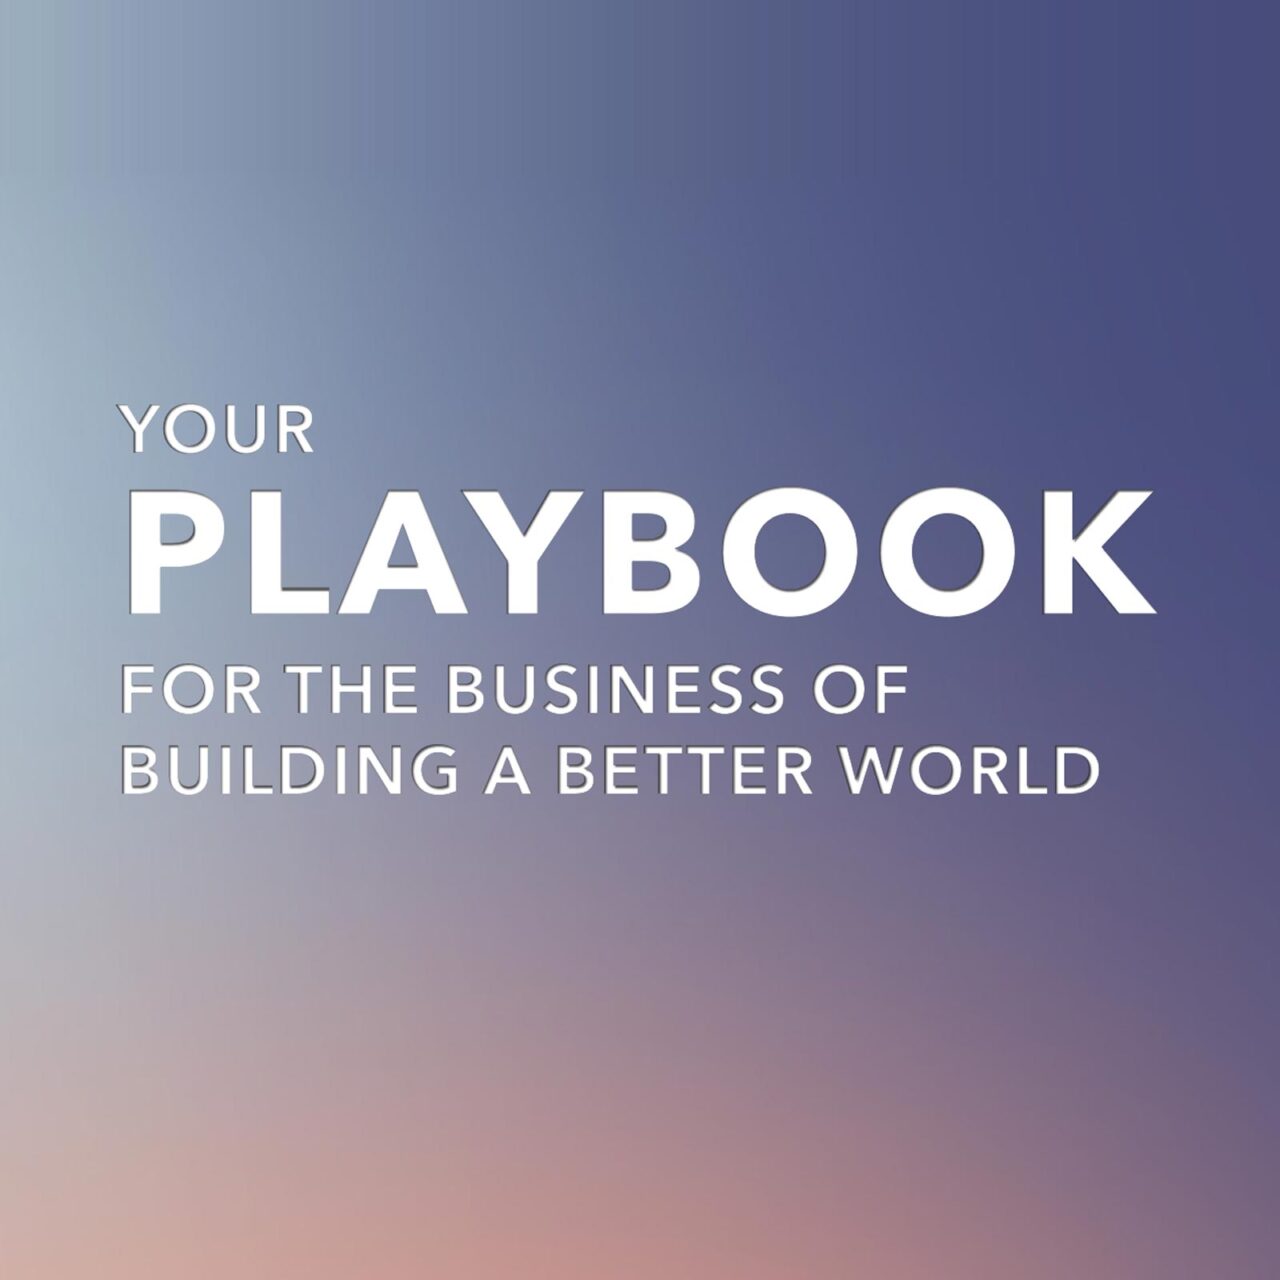 Your Playbook - For the Business of Building a Better World